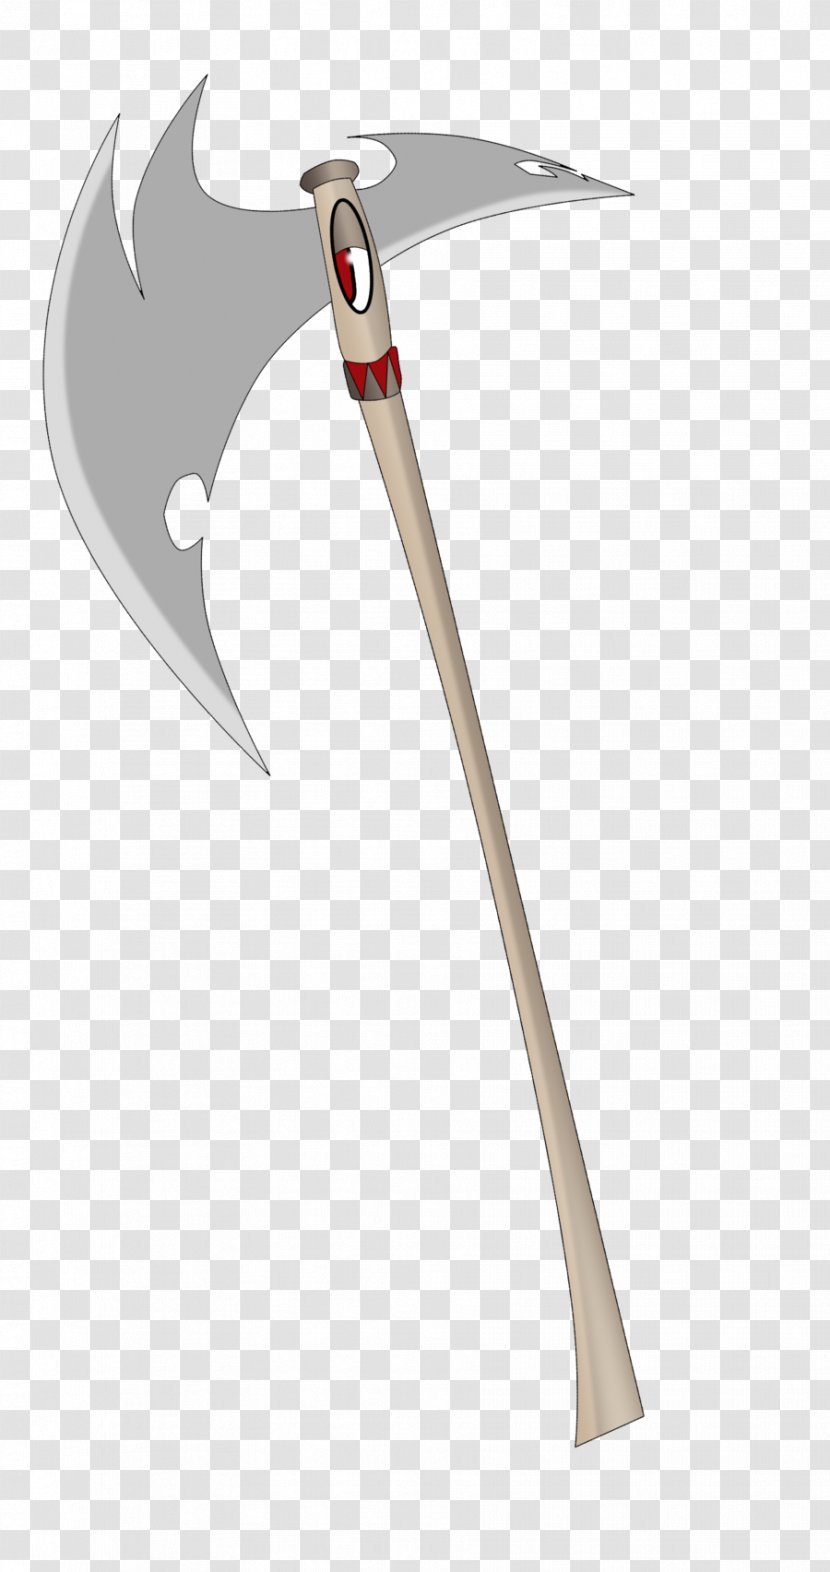 Throwing Axe Product Design - Tool - Blade And Soul Concept Art Transparent PNG